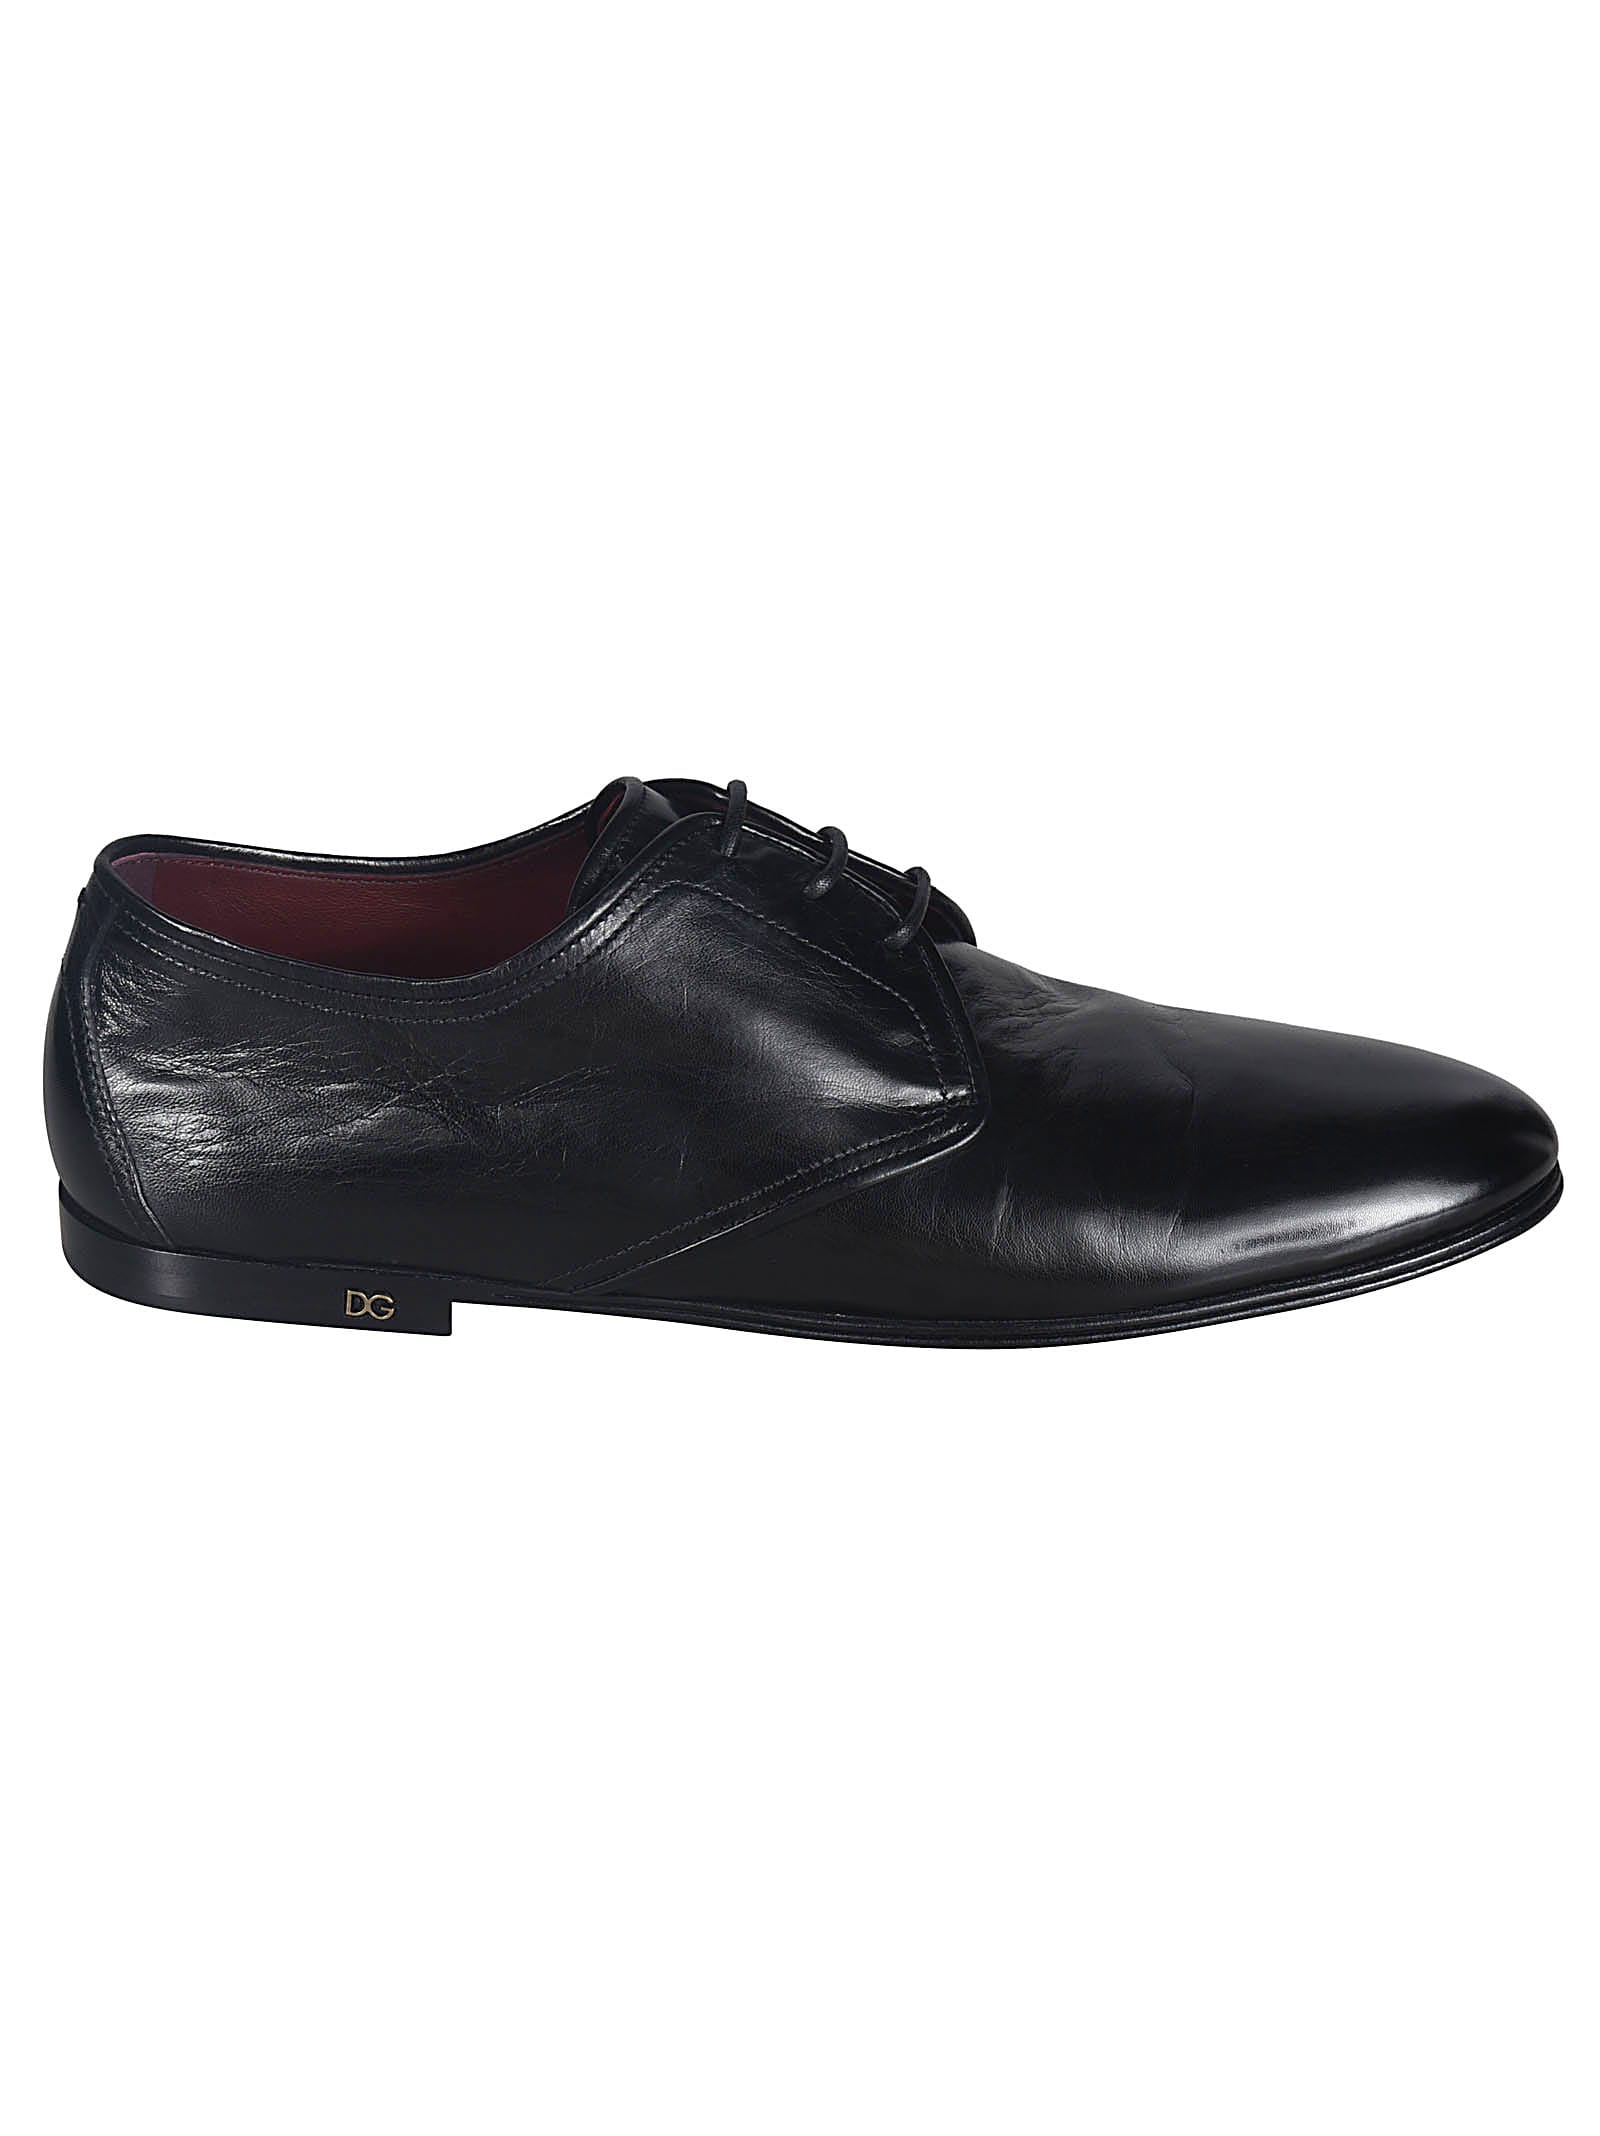 Dolce & Gabbana Logo Plaque Detail Flat Sole Oxford Shoes In Black